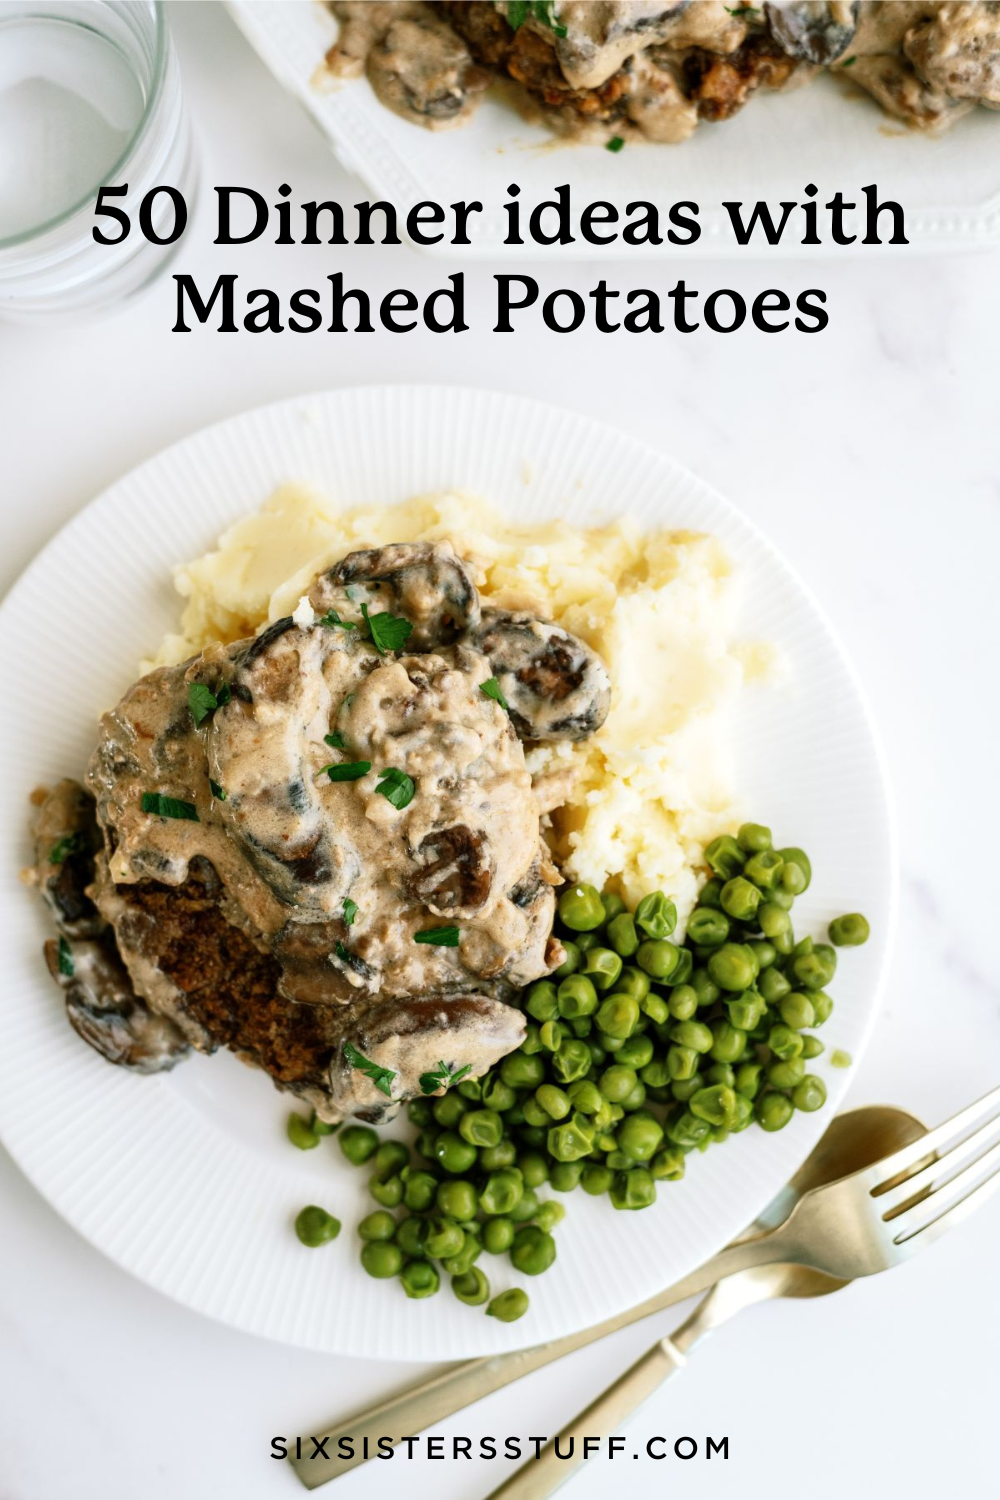 50 Dinner ideas with Mashed Potatoes